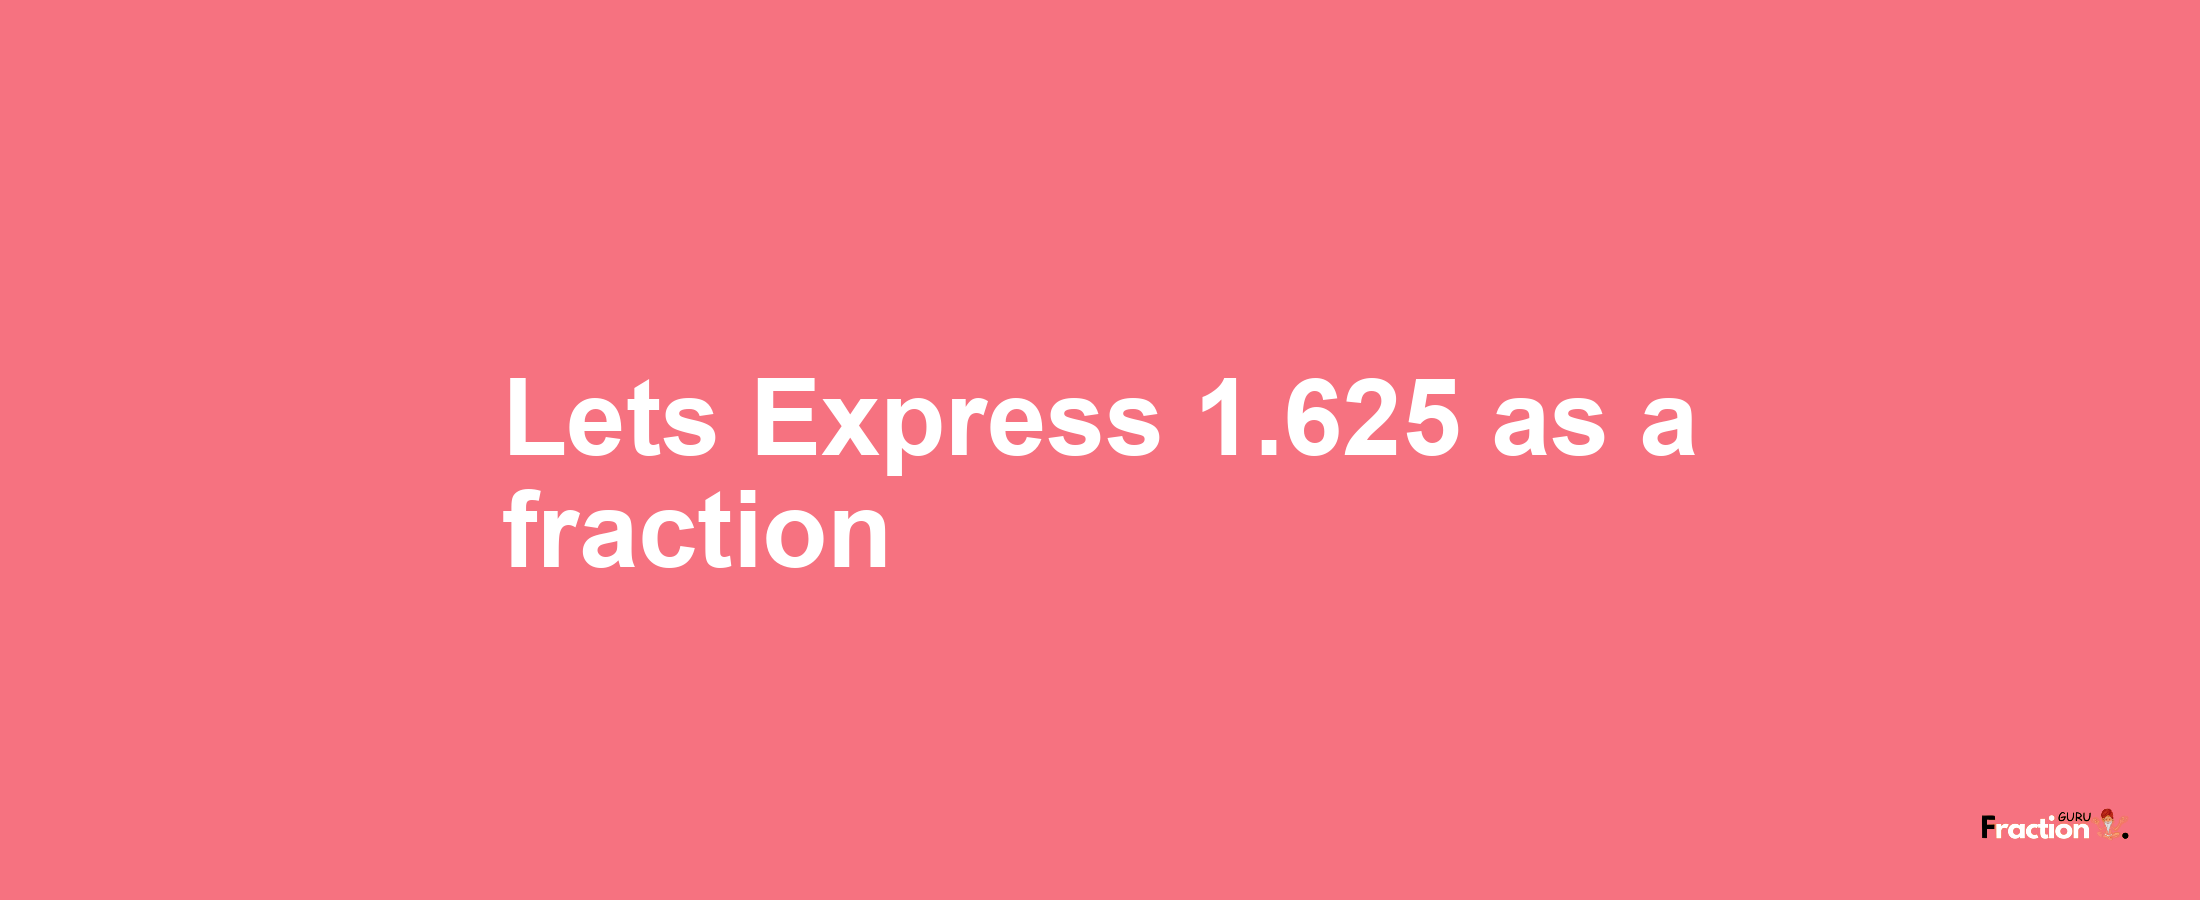 Lets Express 1.625 as afraction